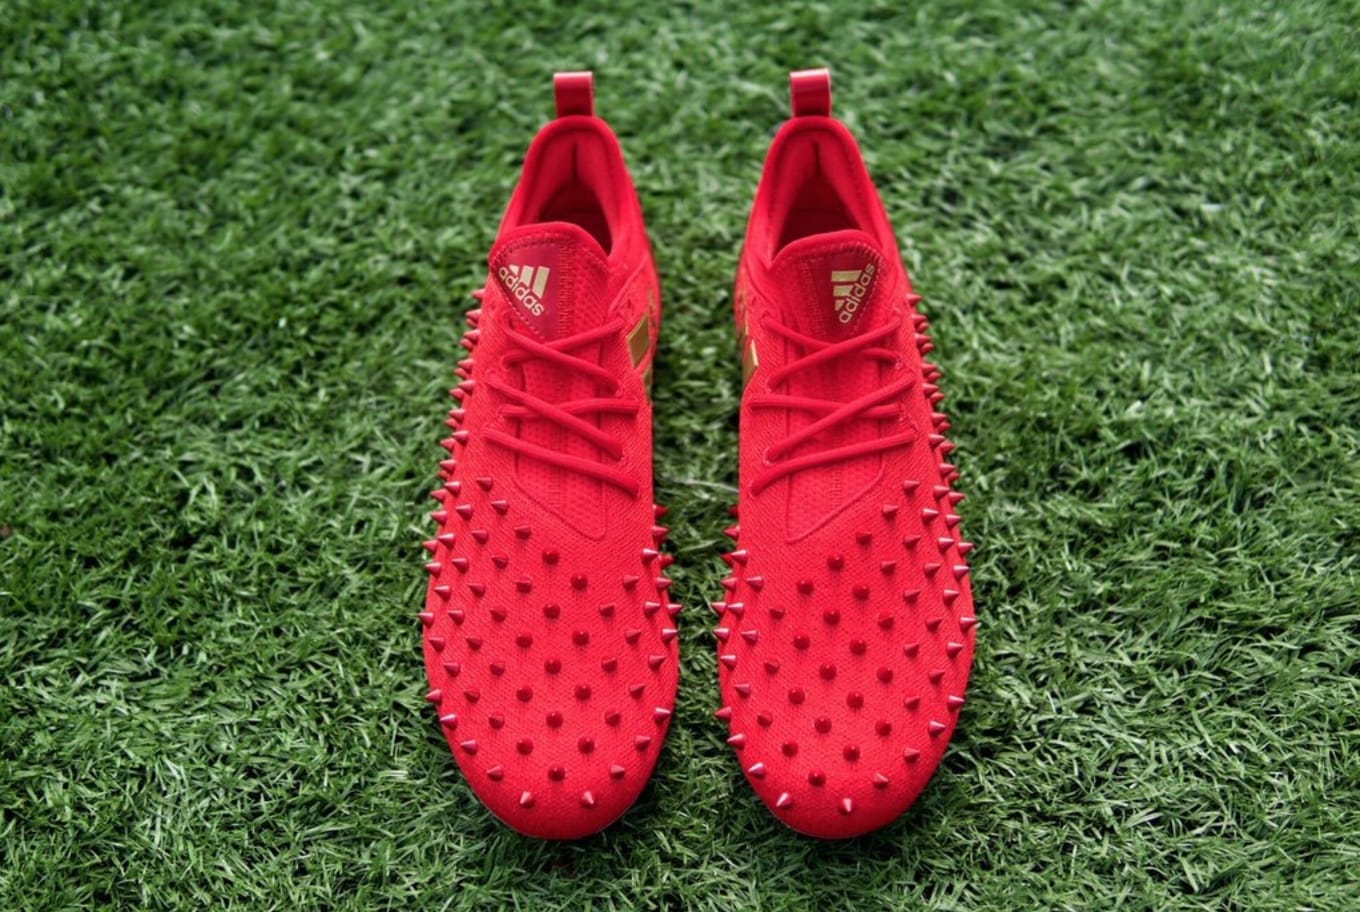 red and gold adidas football cleats